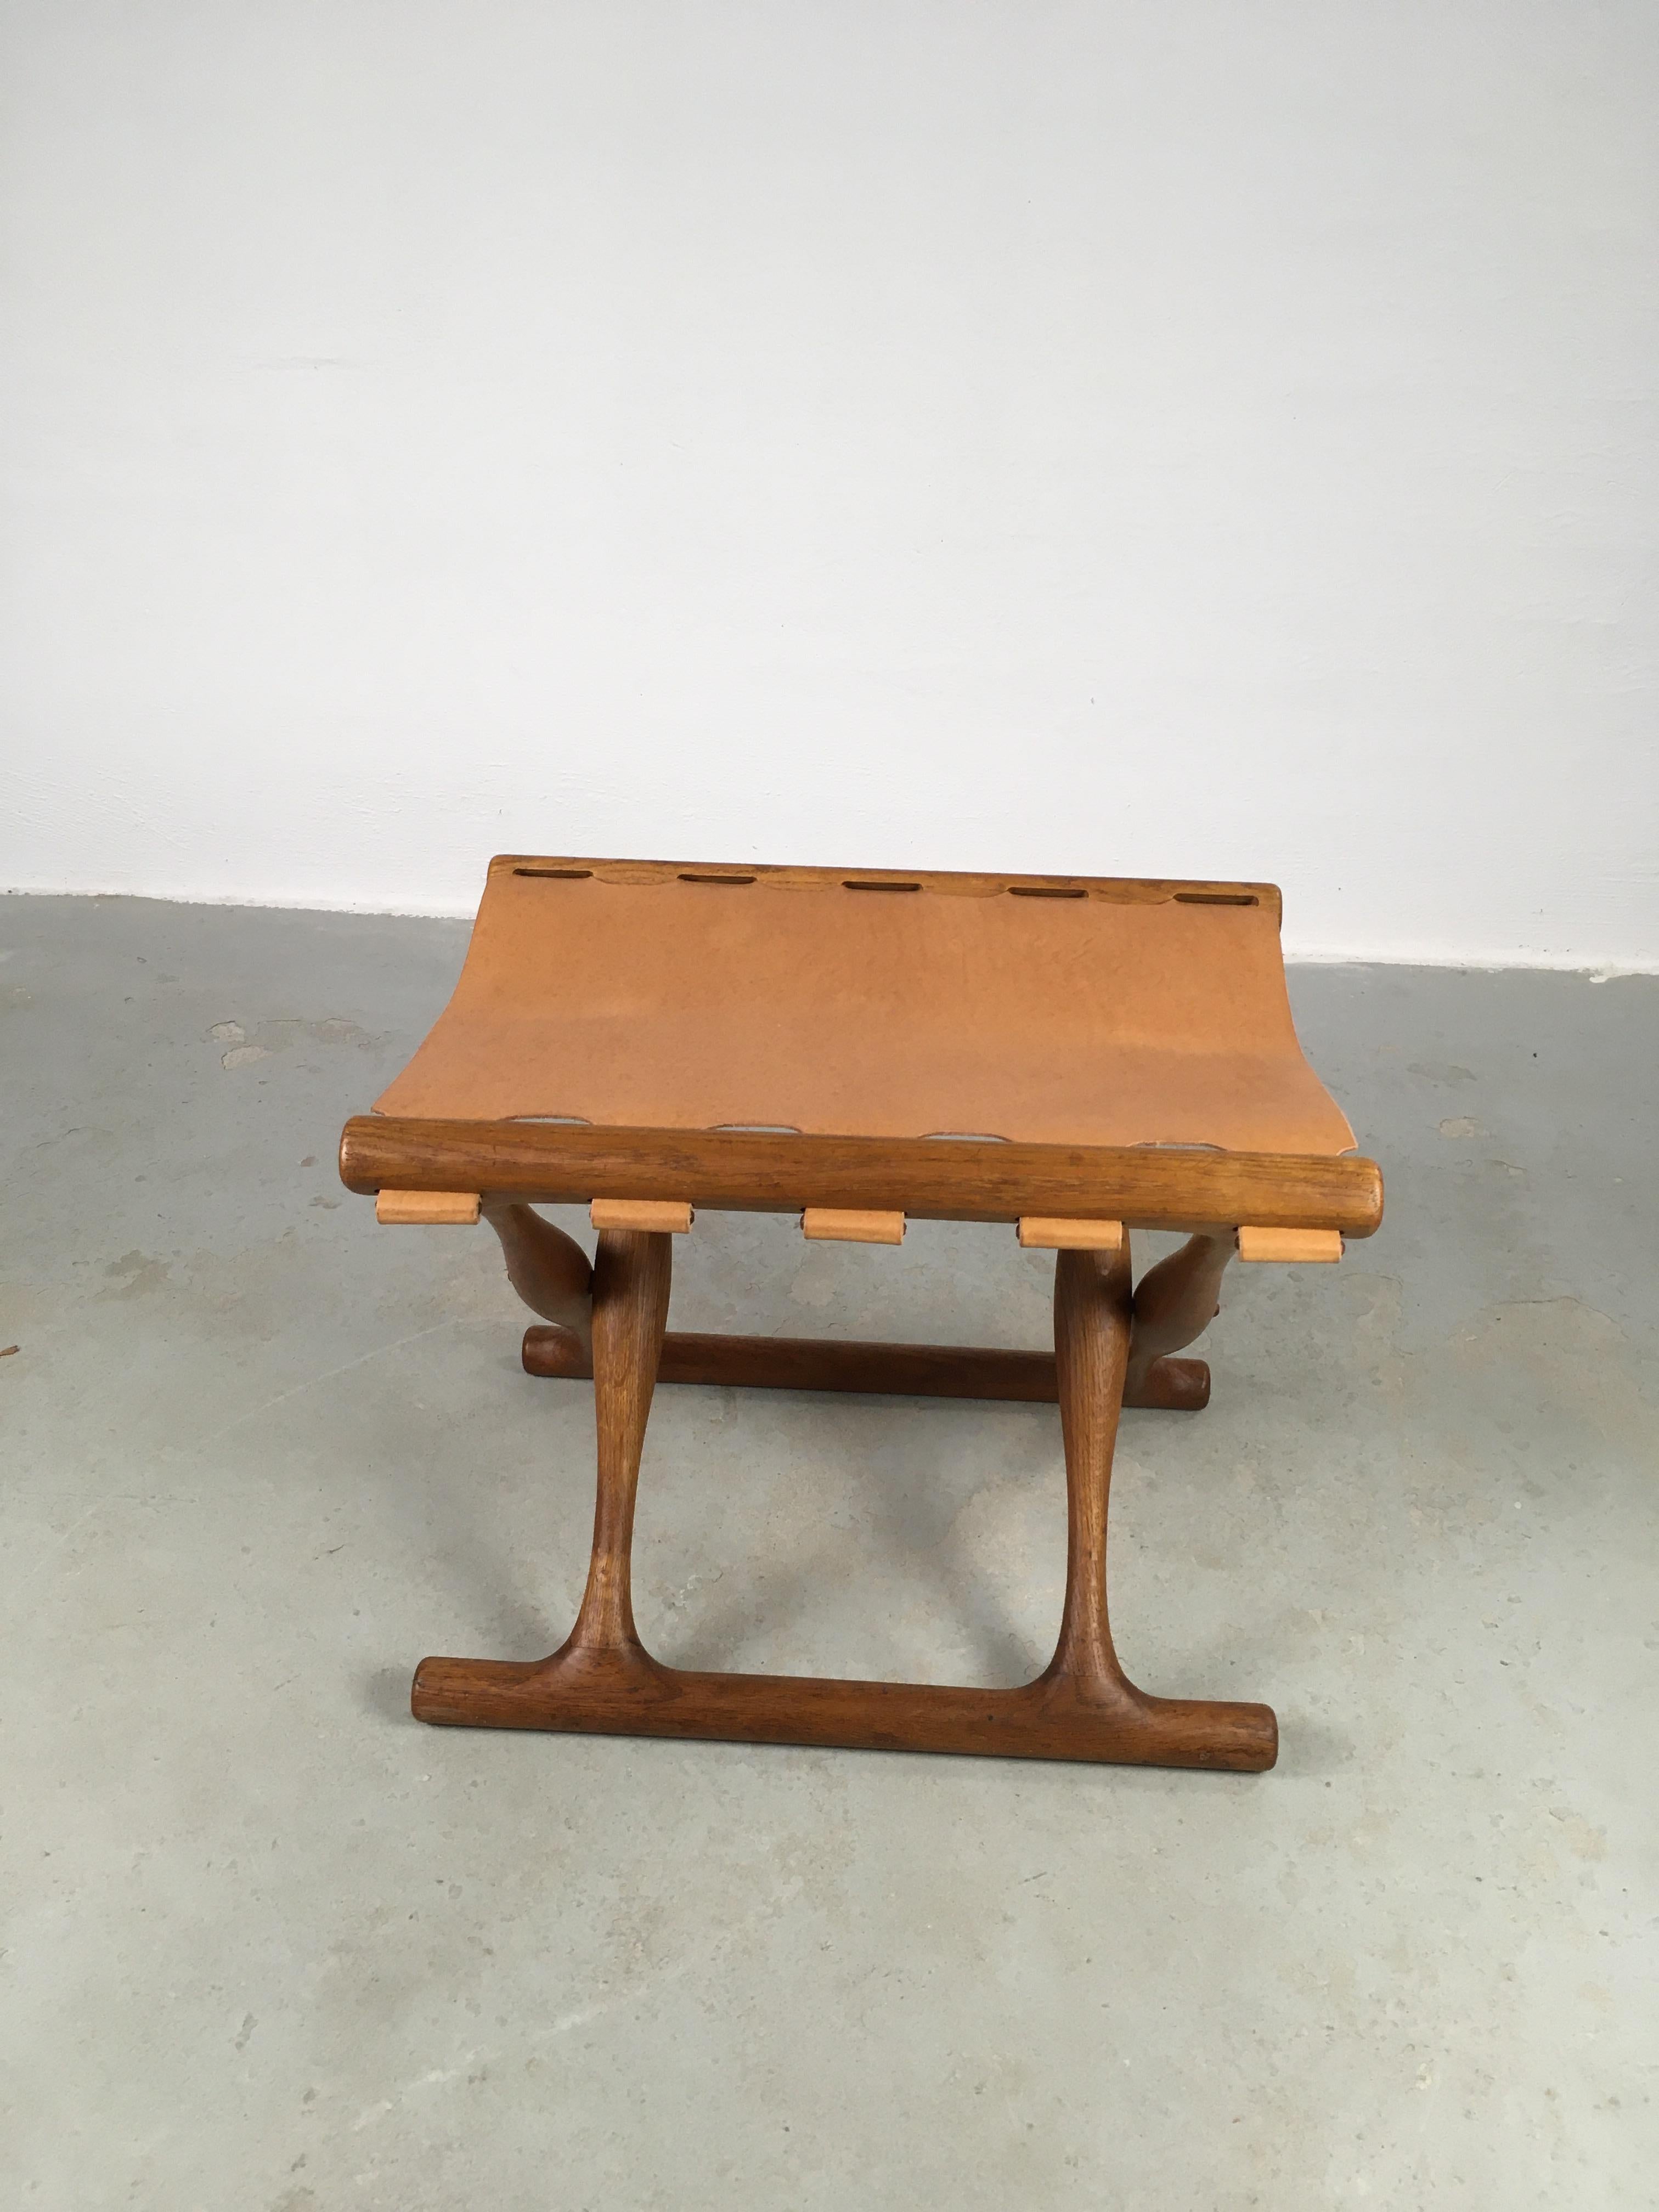 1960's Danish Poul Hundevad Folding Footstool in Oak and Leather Seat For Sale 1